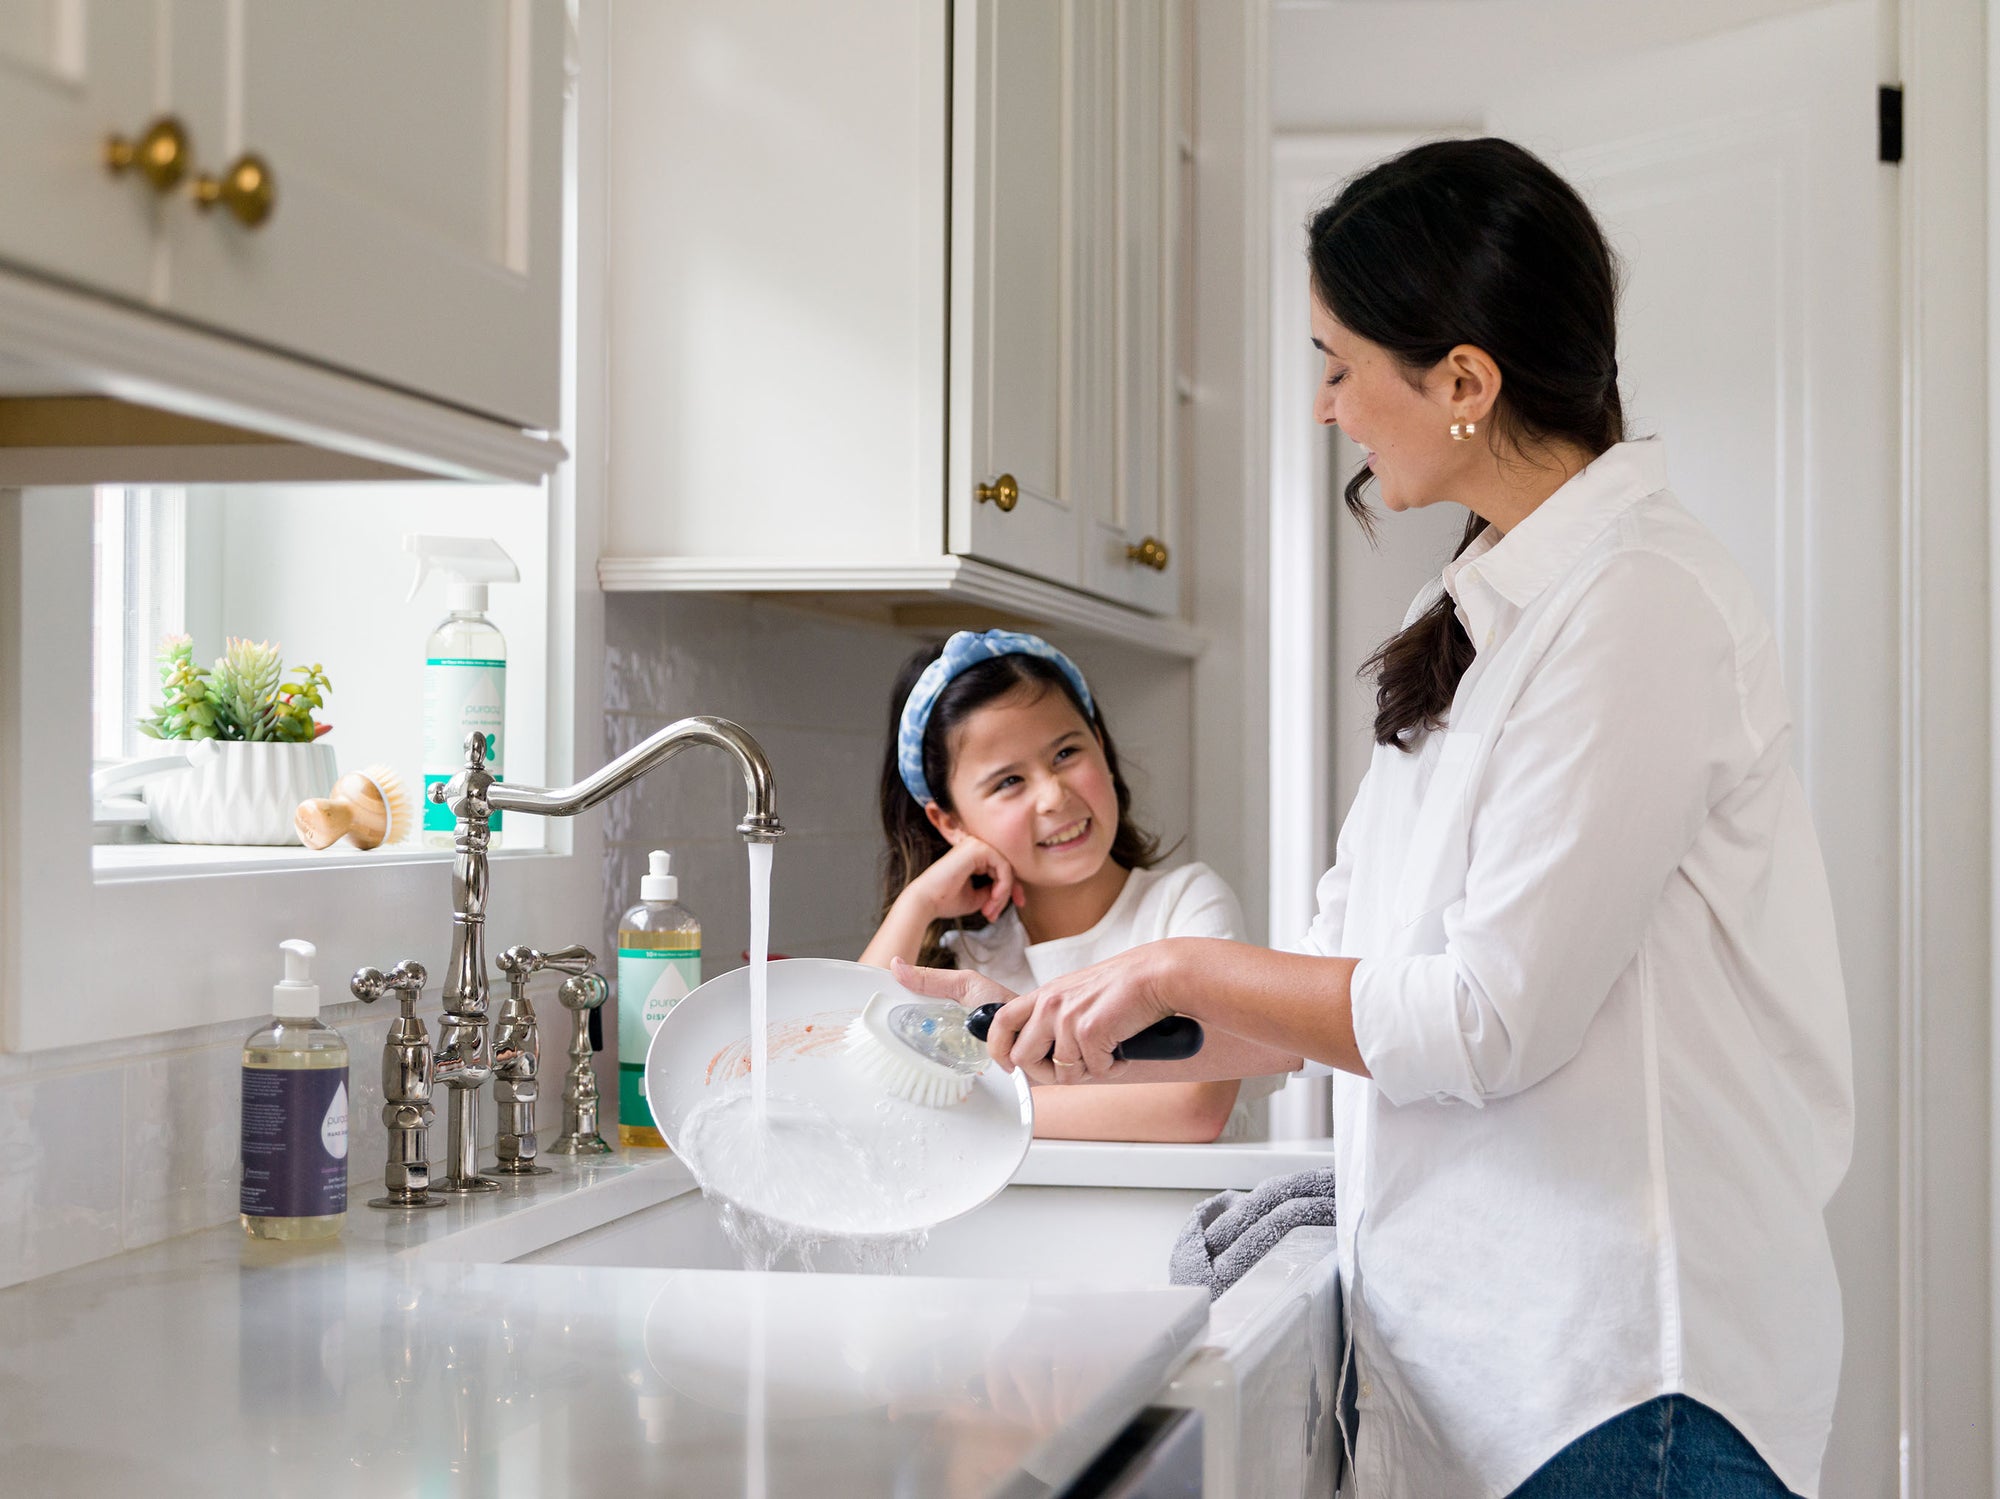 Why Should You Choose Unscented Dish Soap?